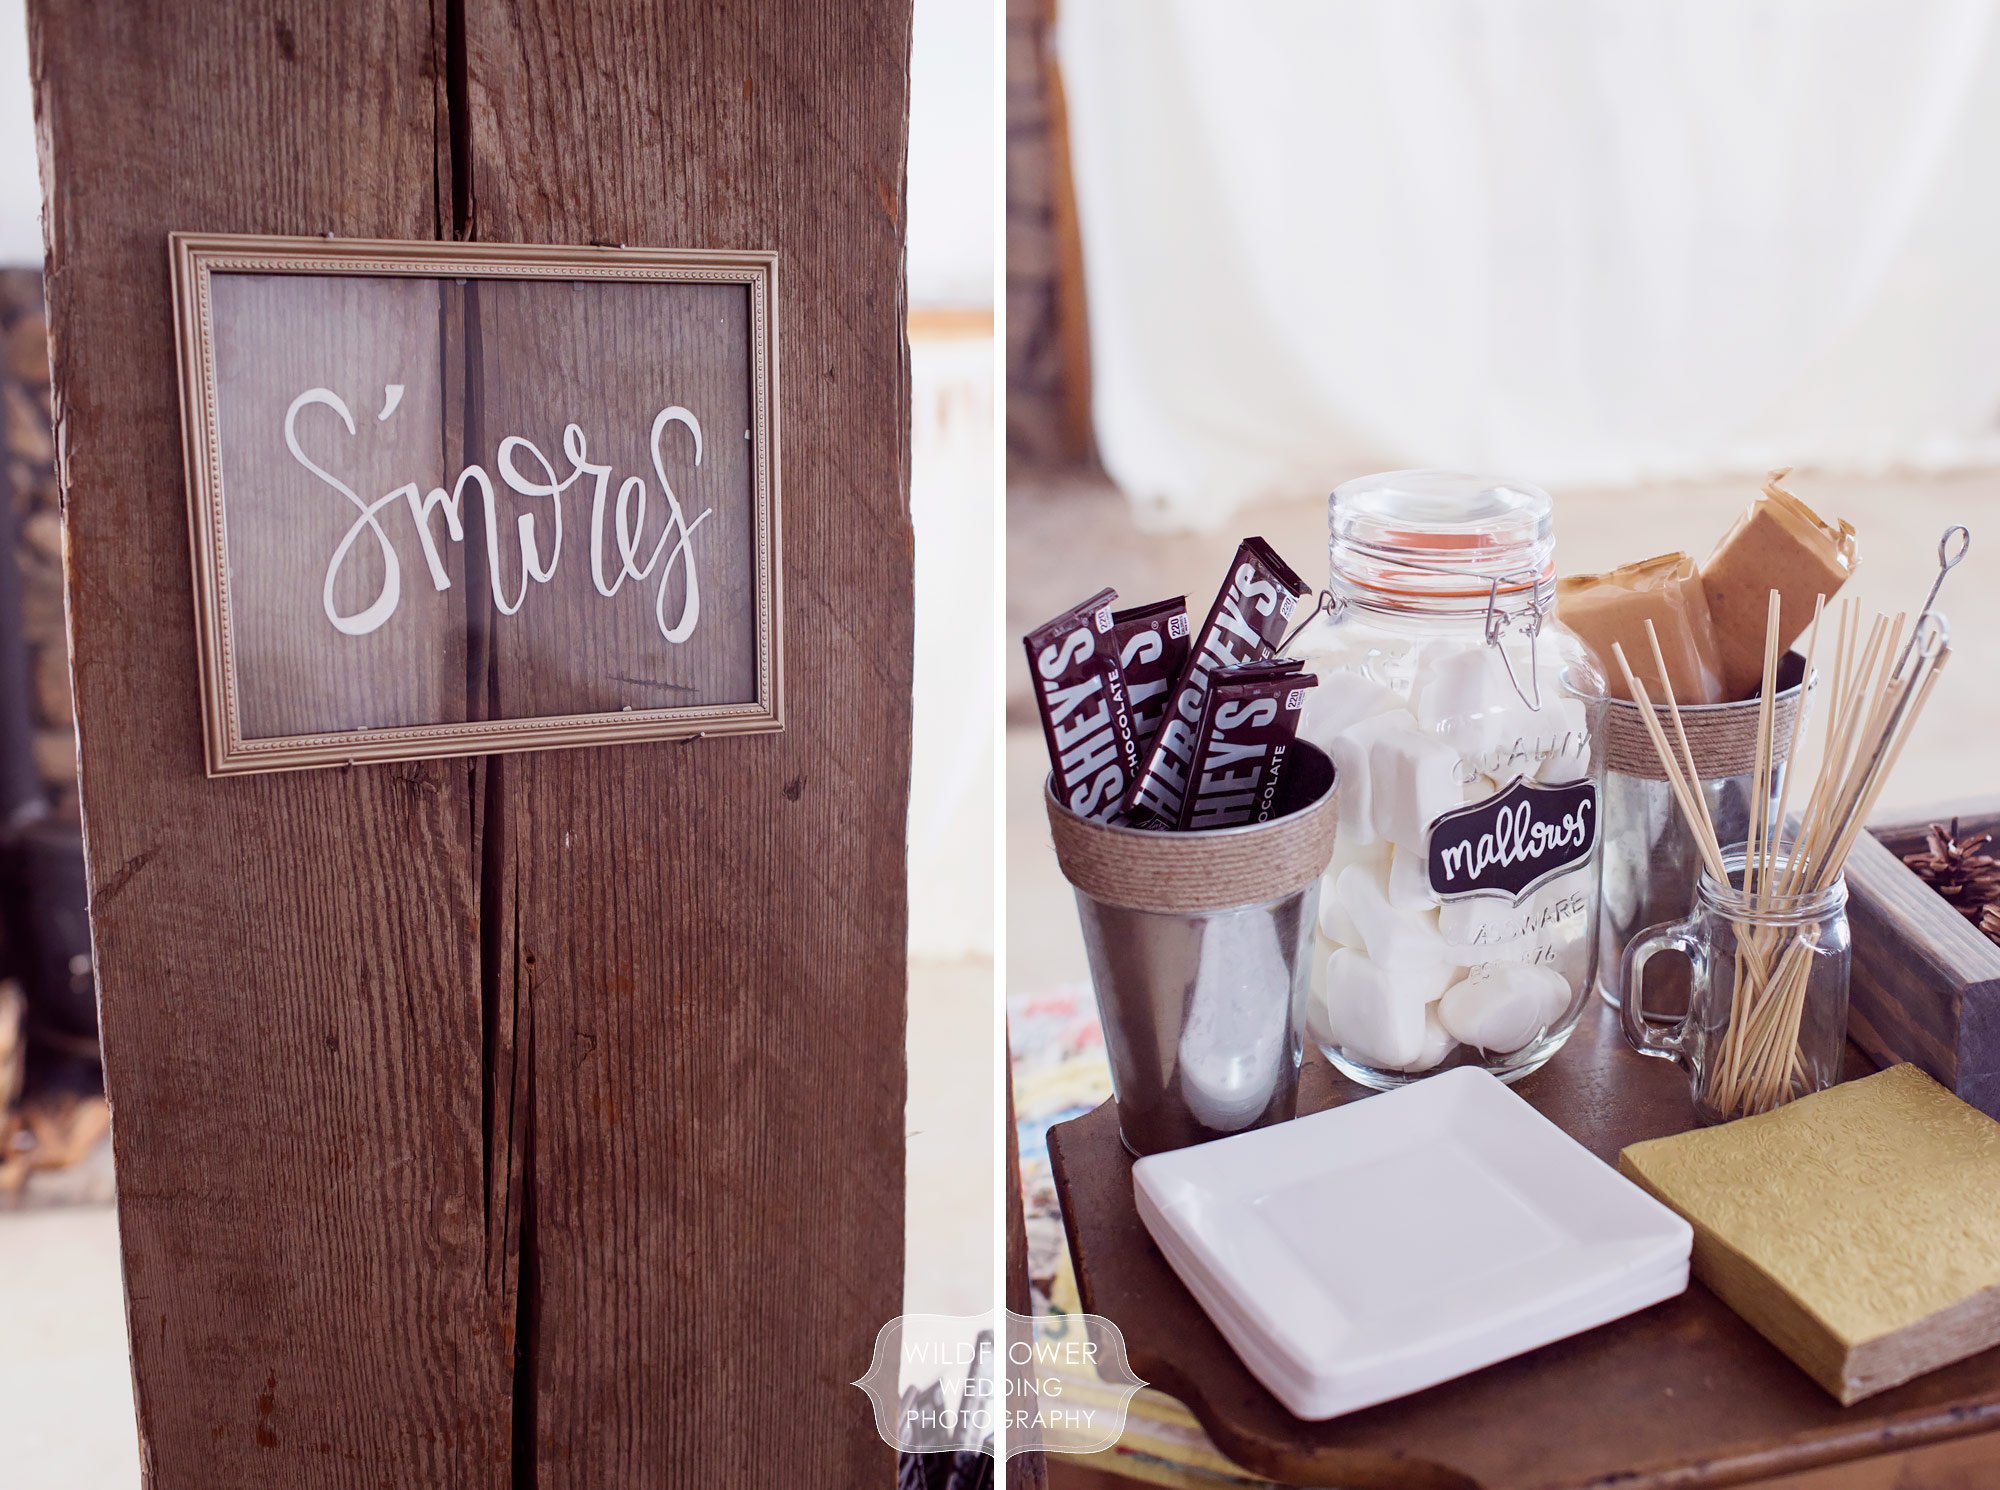 Awesome idea for a winter wedding treat, this smores bar had marshmallows, chocolate and an indoor roasting set up.